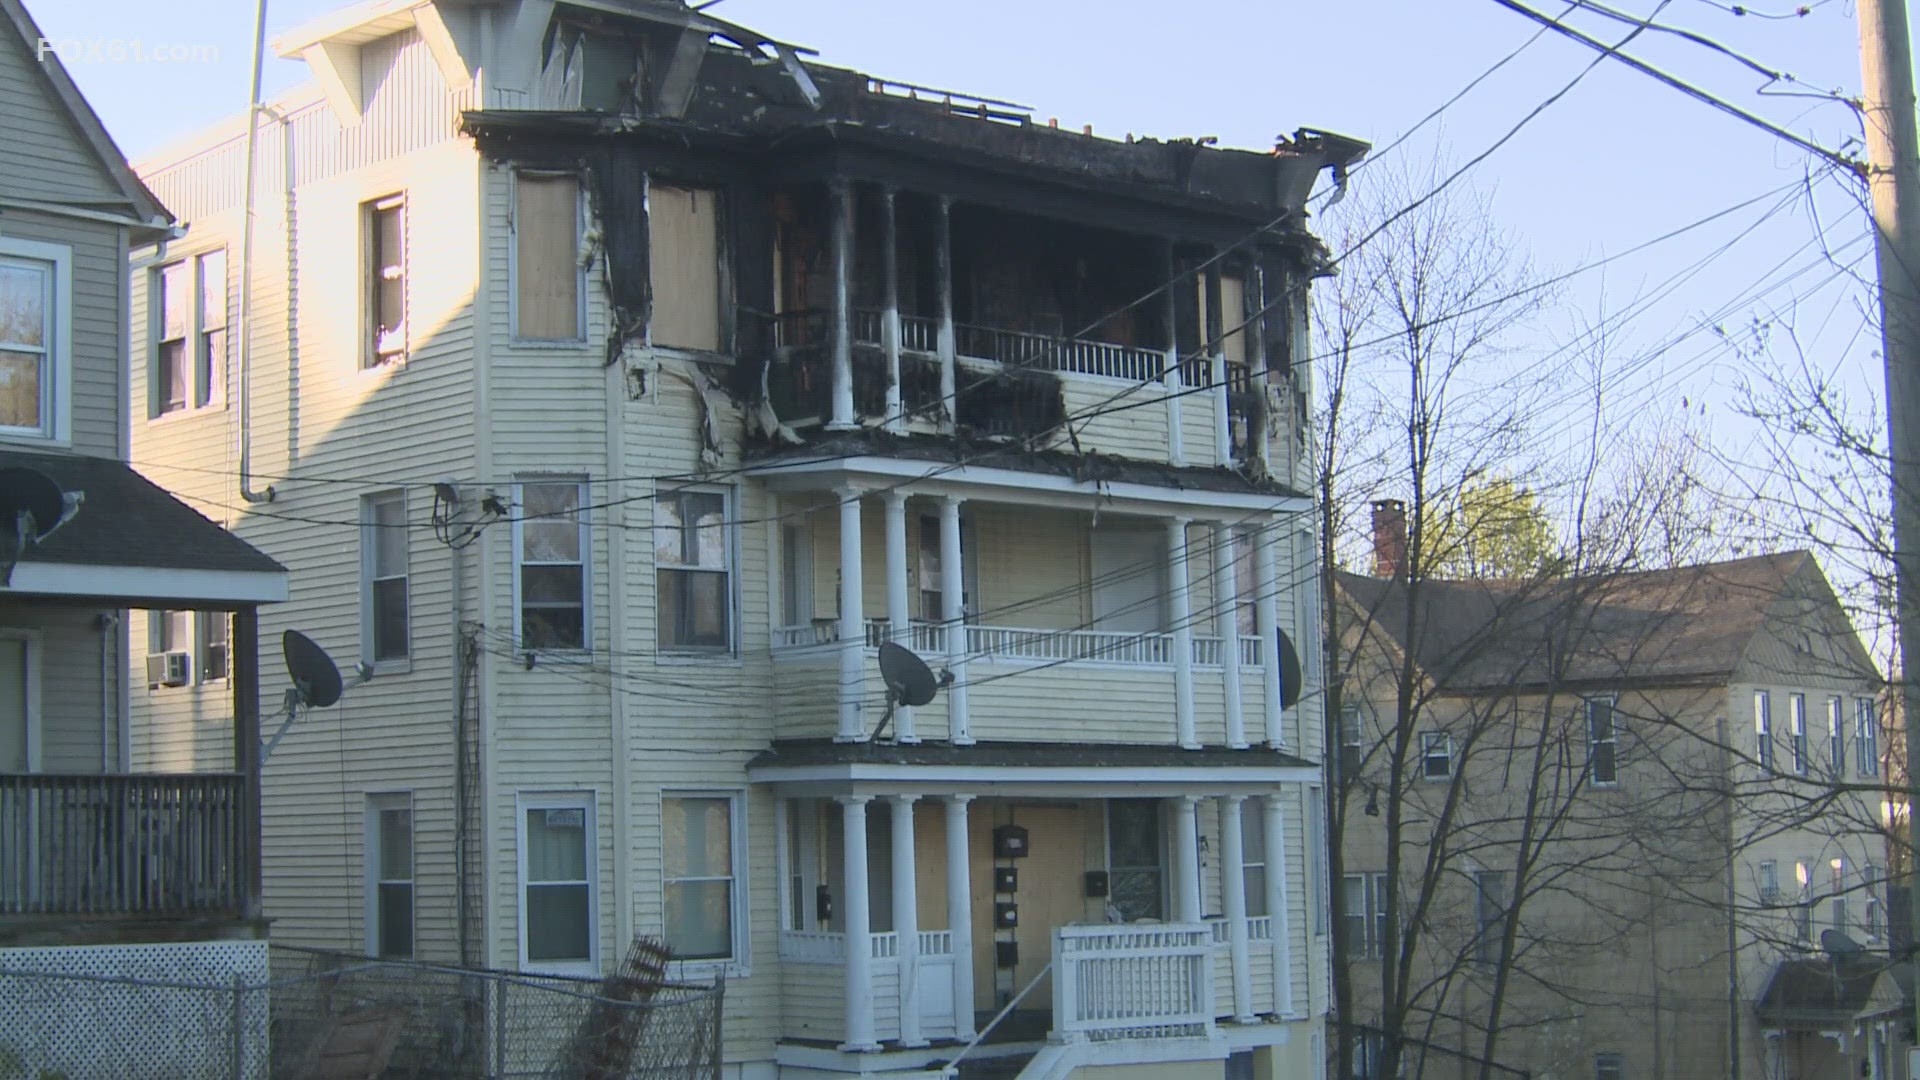 More than two dozen people are now without a home in Waterbury after a fire ripped through a multi-family home Monday night. Everyone got out safely.